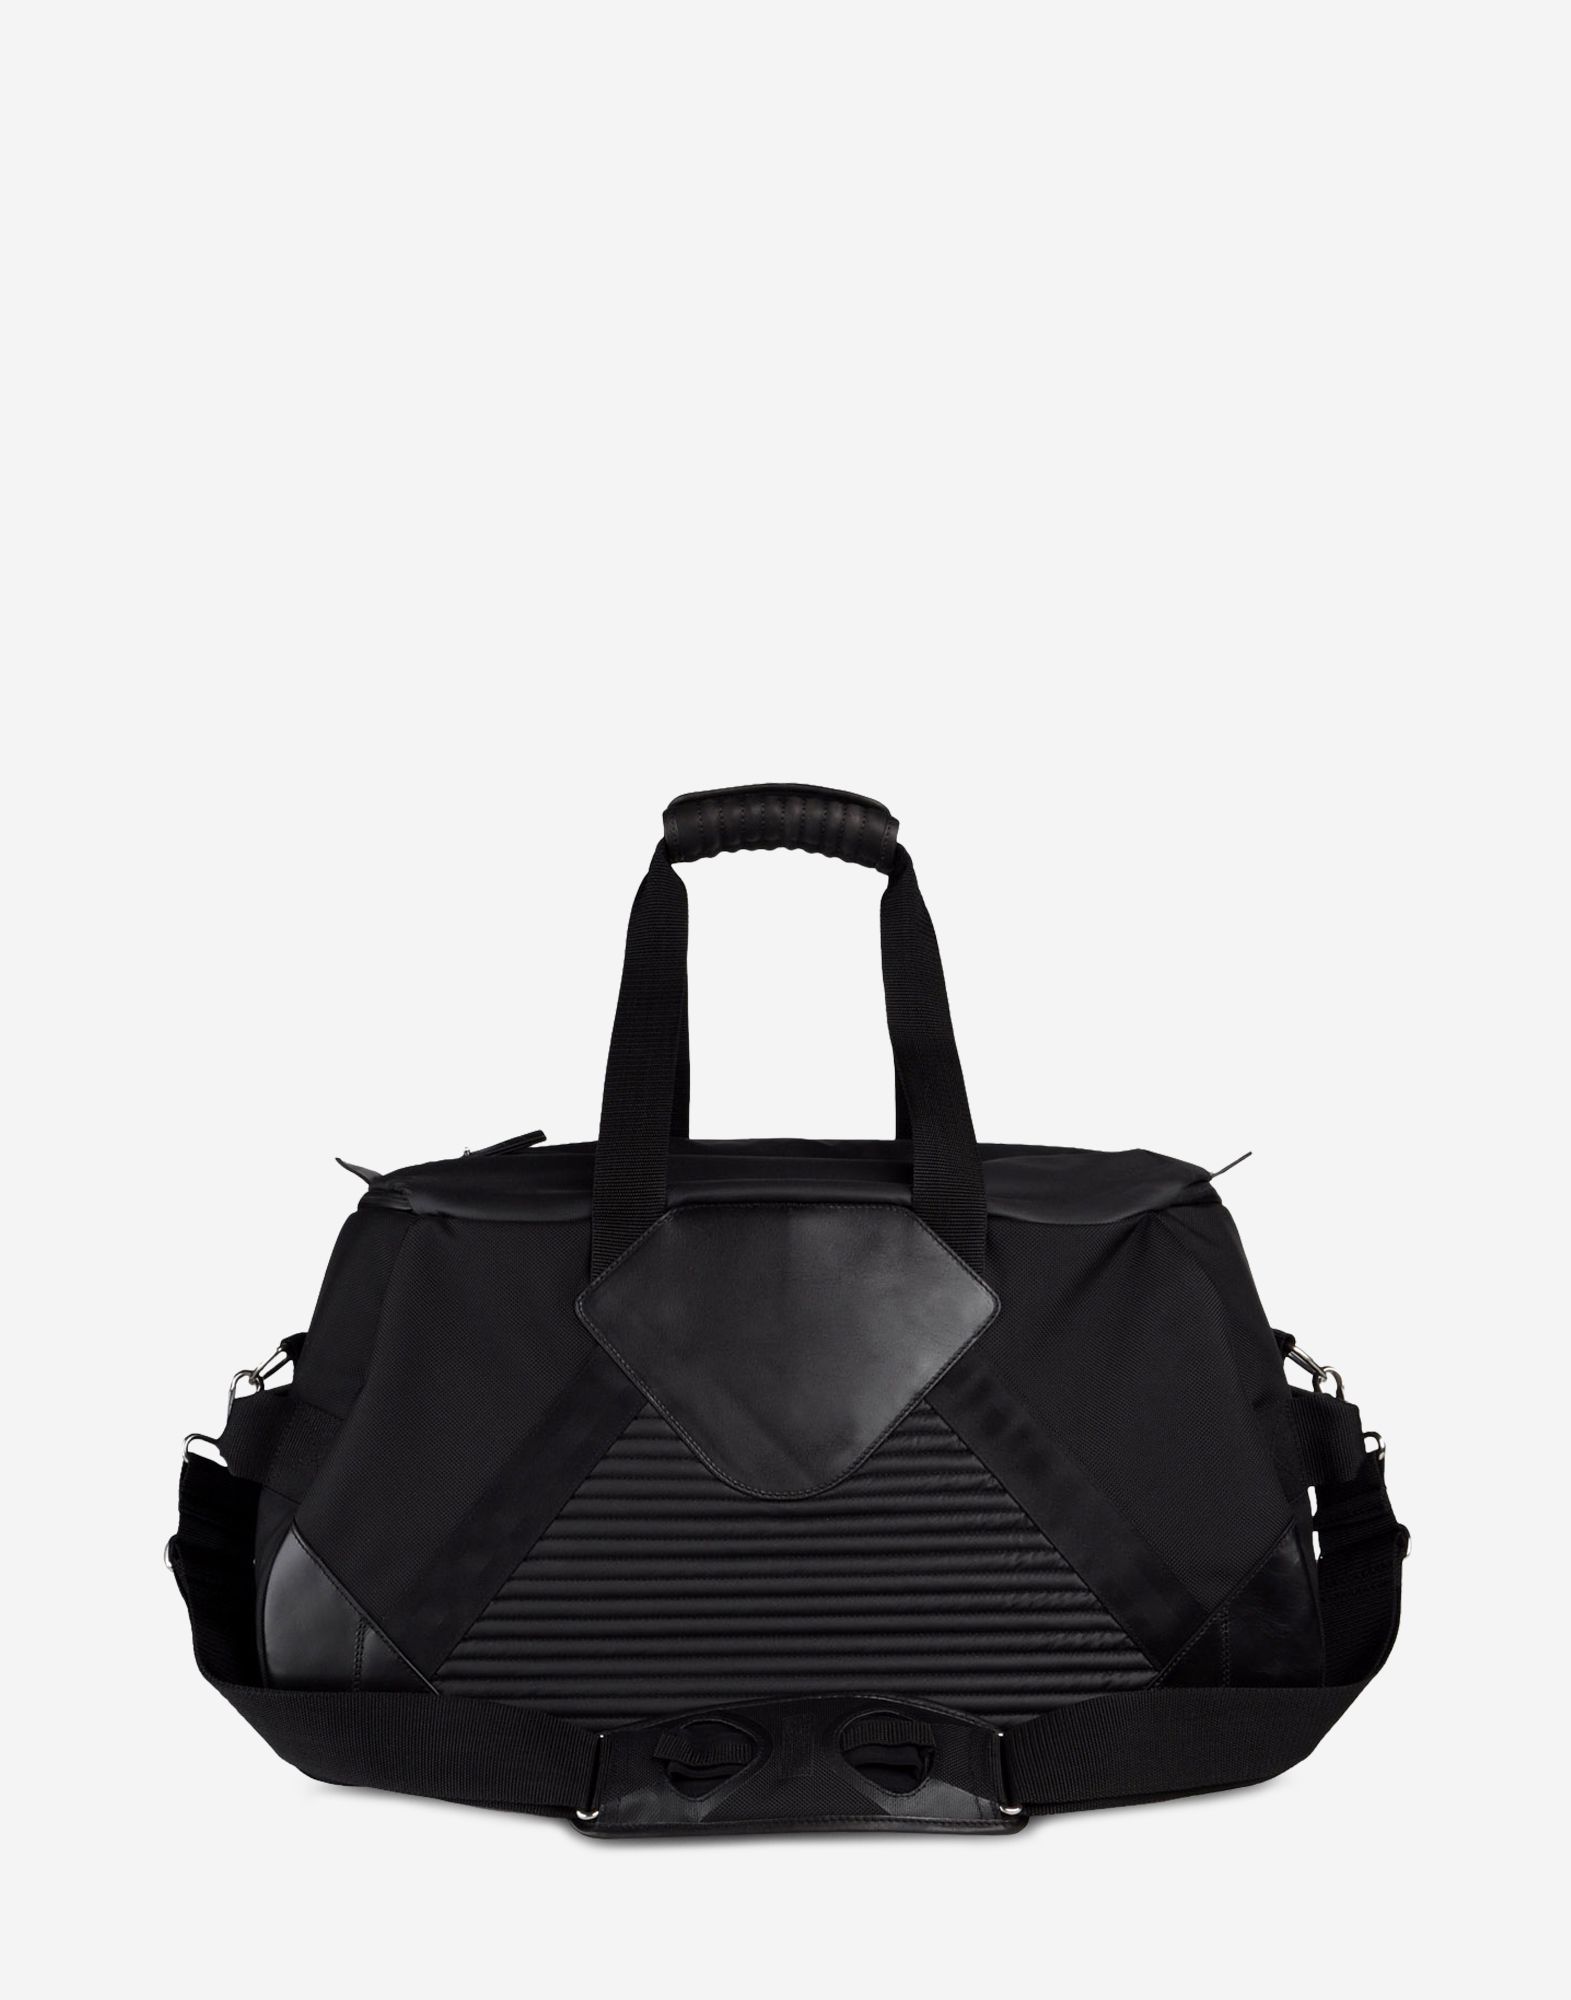 Y 3 Mobility Duffel 2 for Women | Adidas Y-3 Official Store